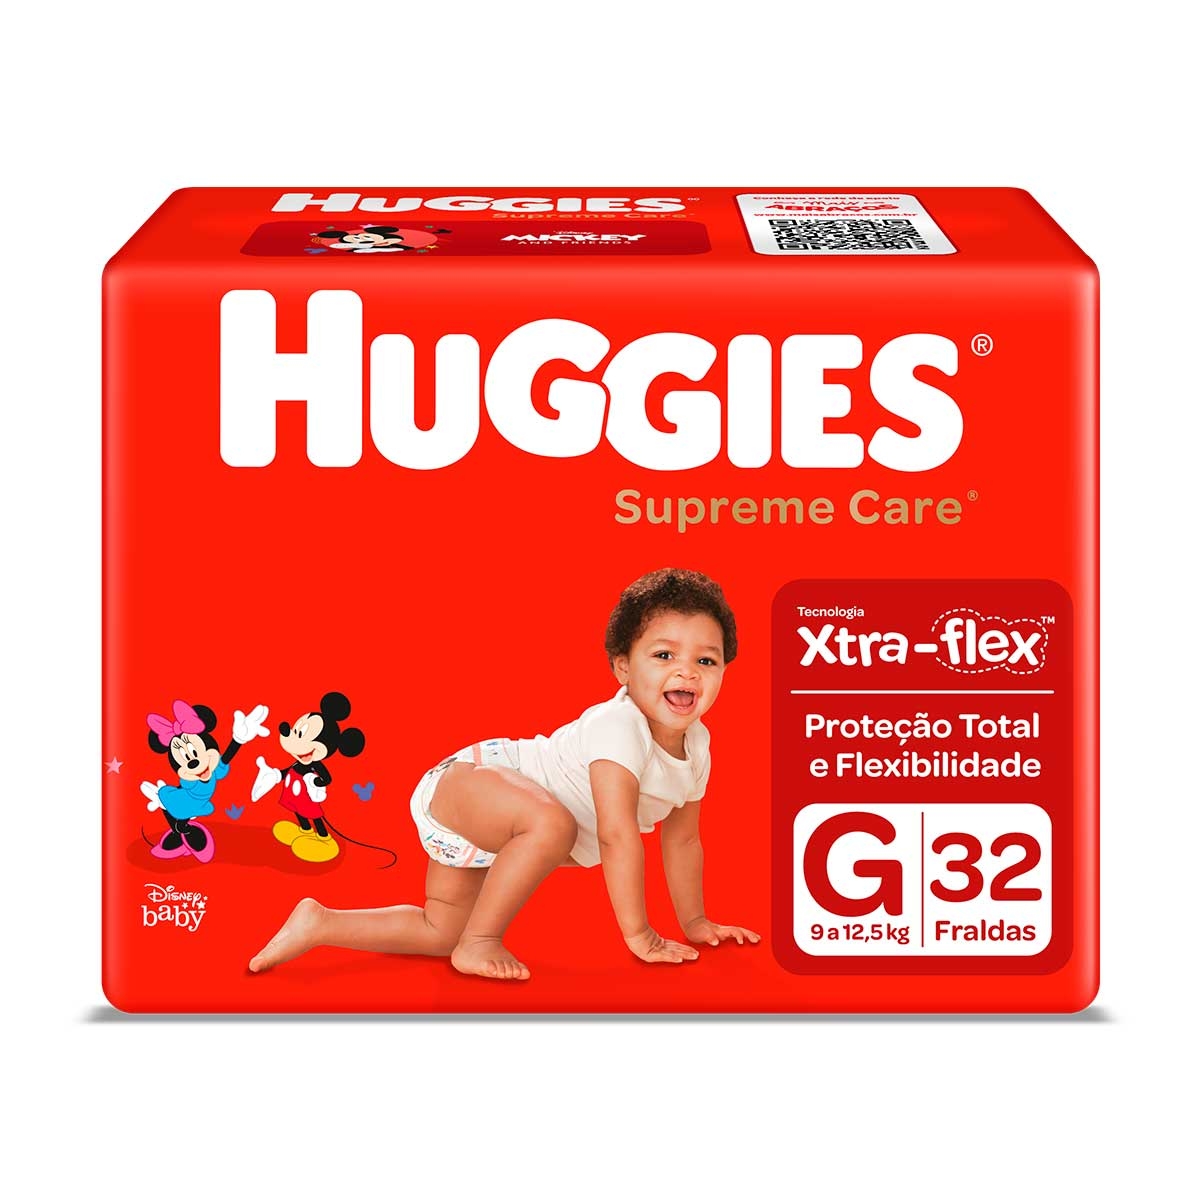 pampers 2 144 tesco